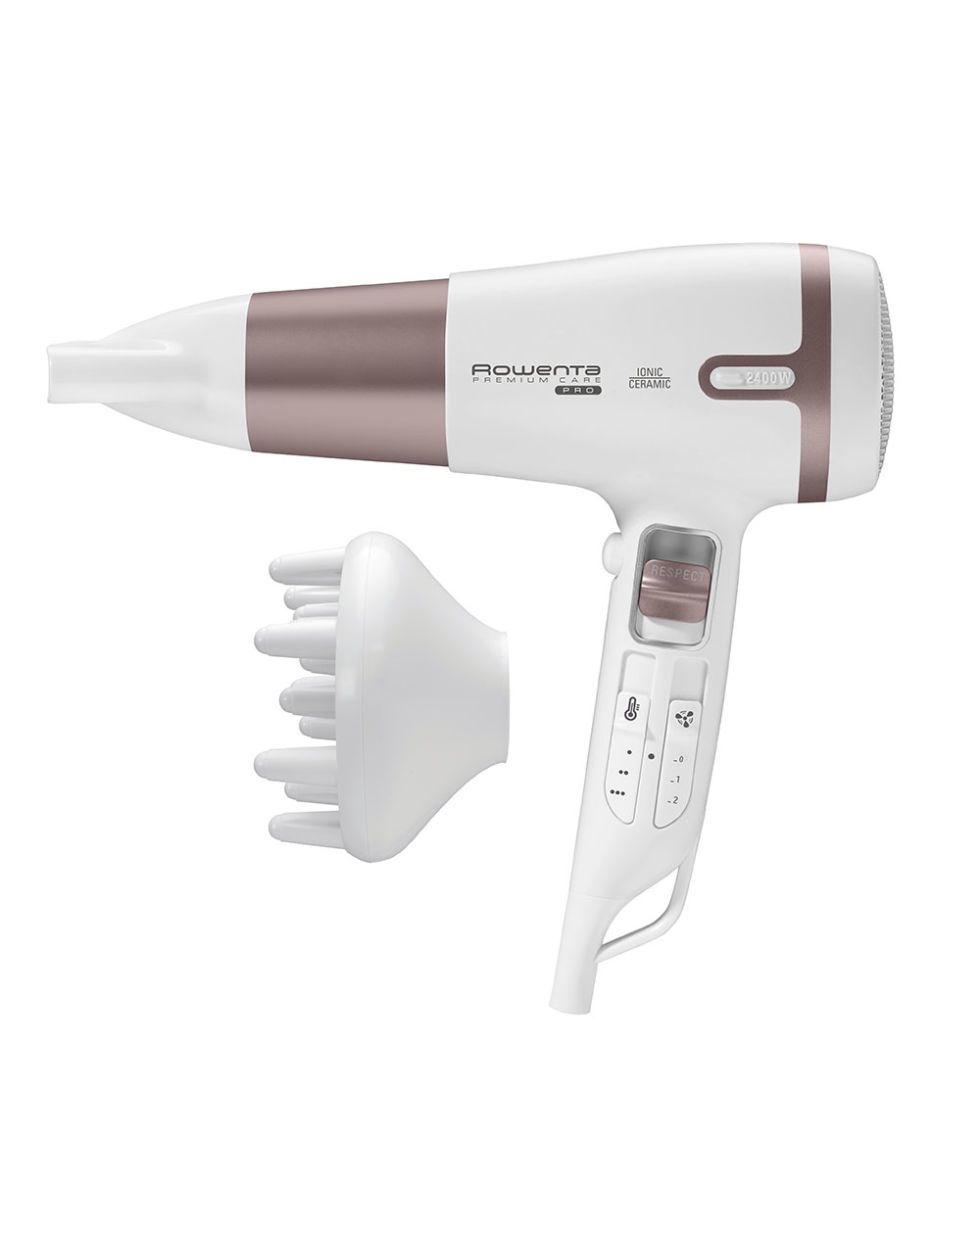 Hair dryer, Product, Home appliance, 